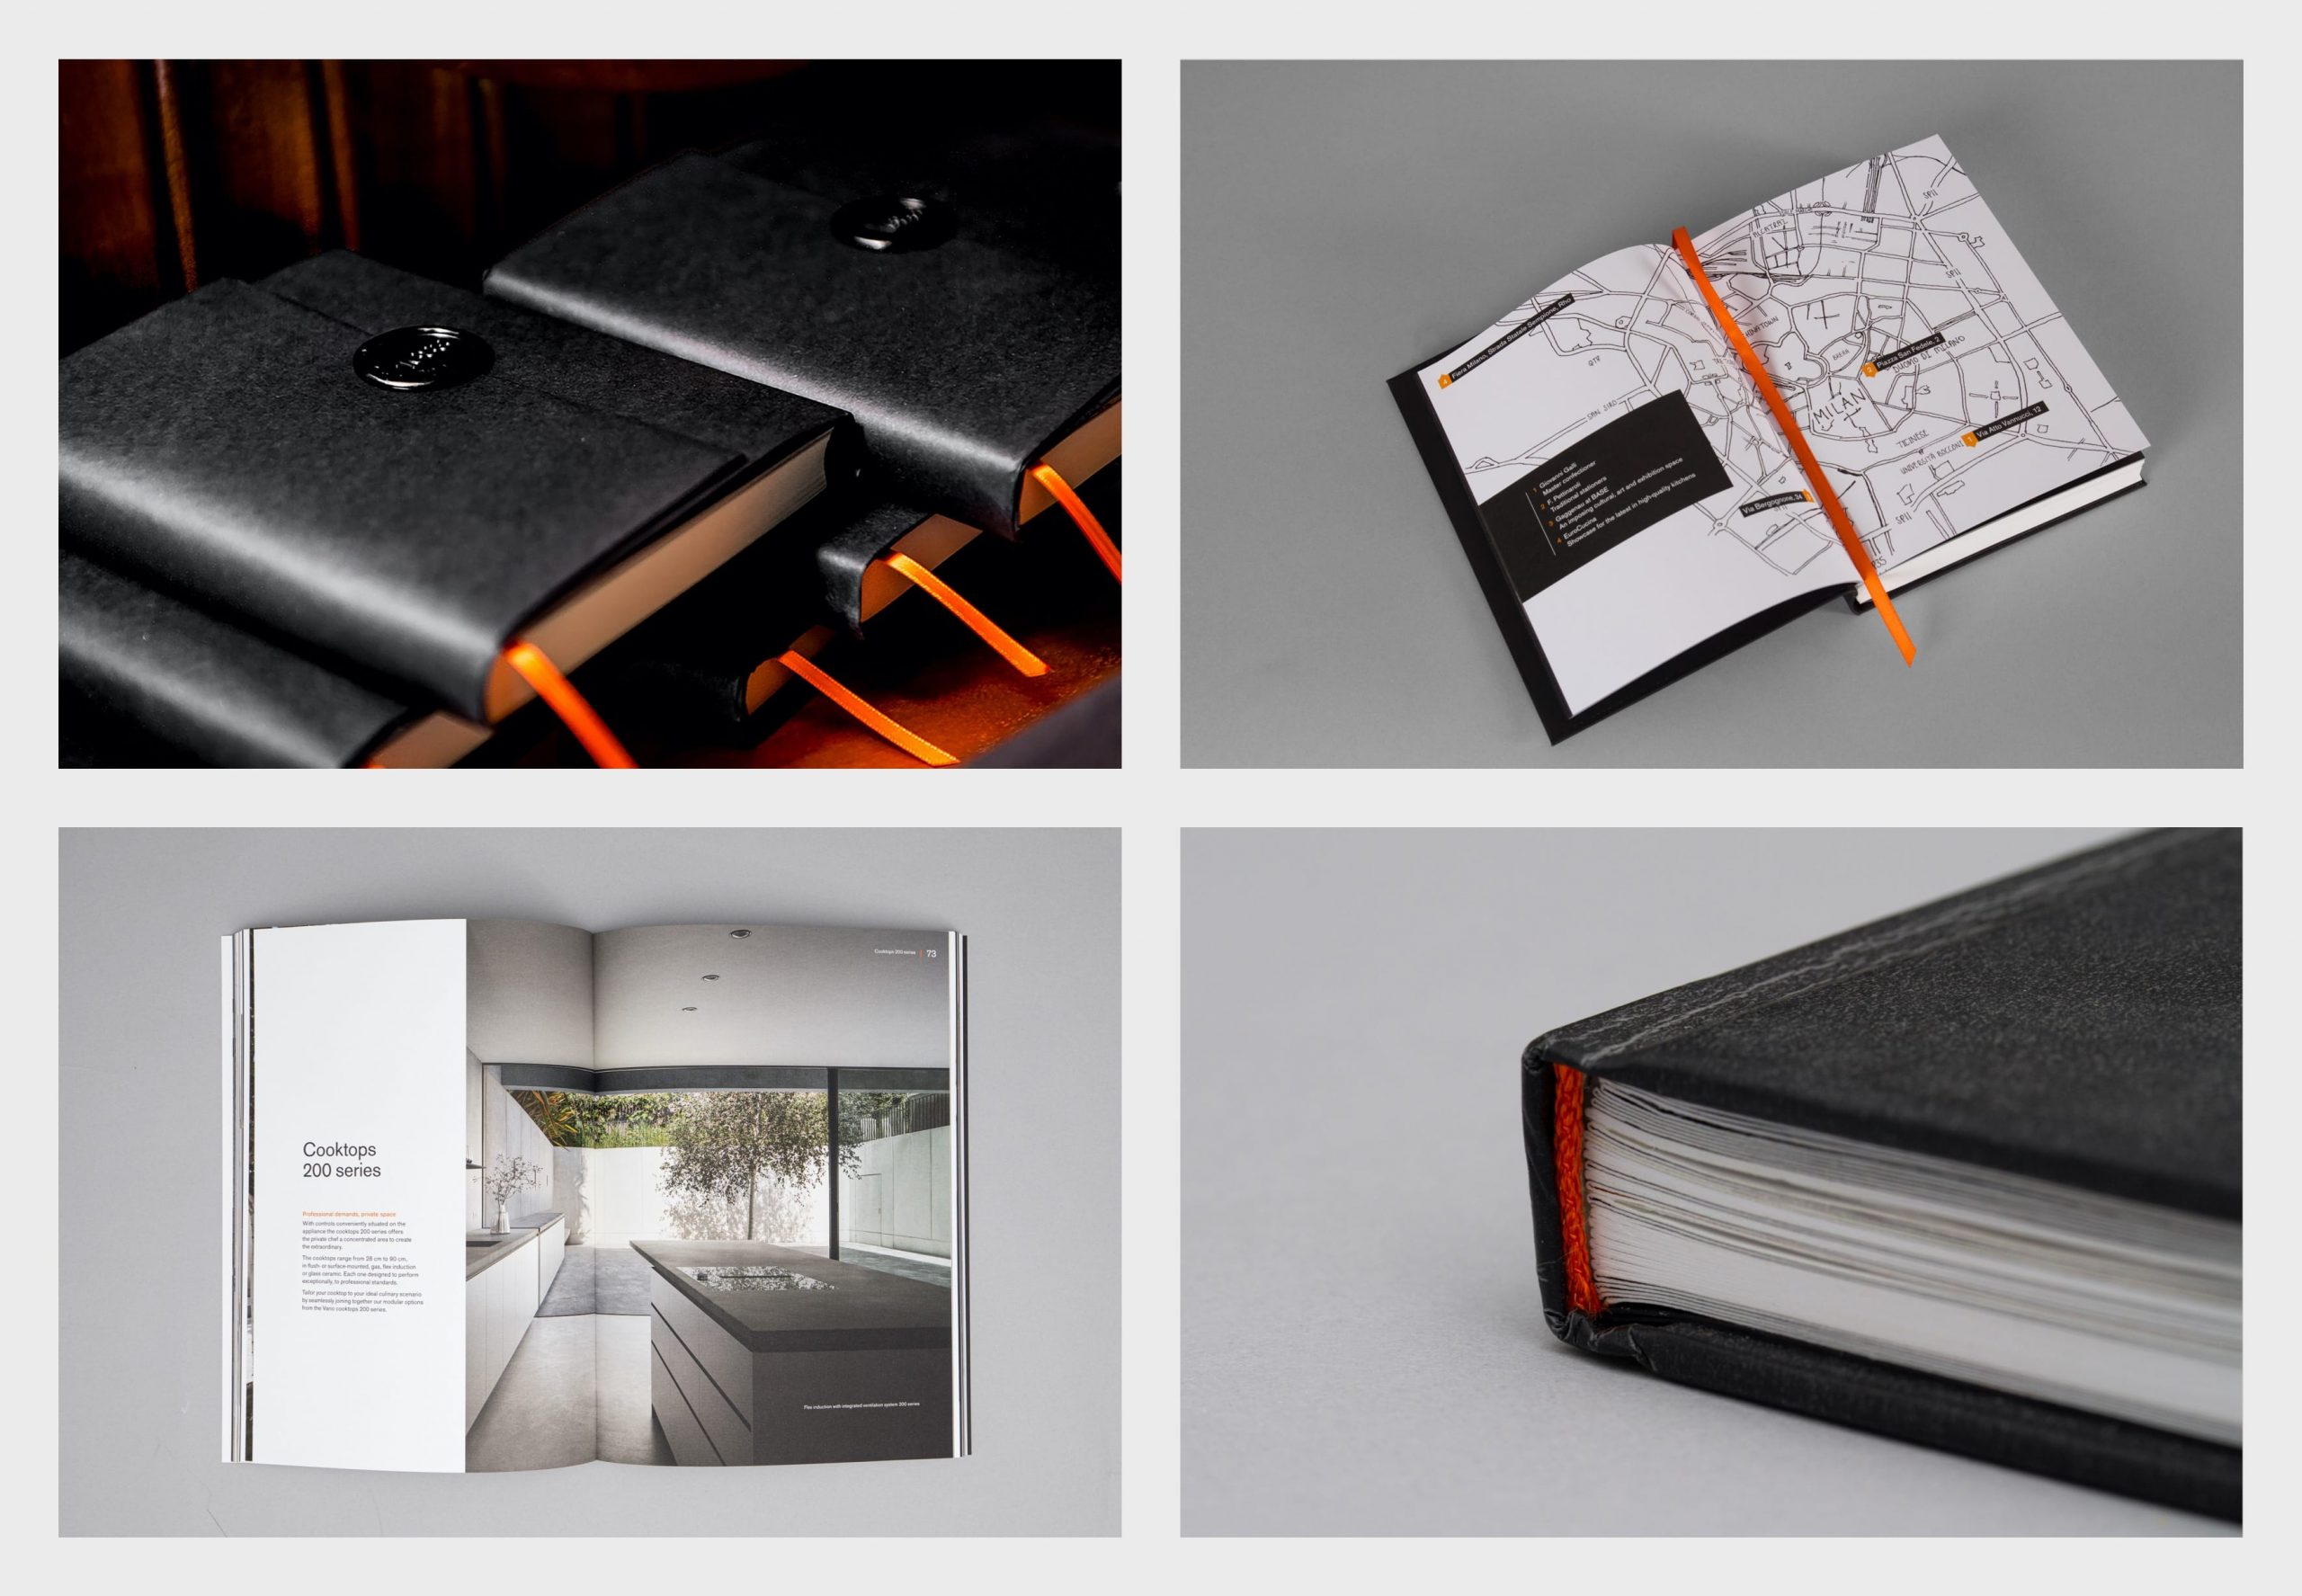 Gaggenau notebooks for events, inside spread of map, advert in a magazine, cloe up of coloured print detail